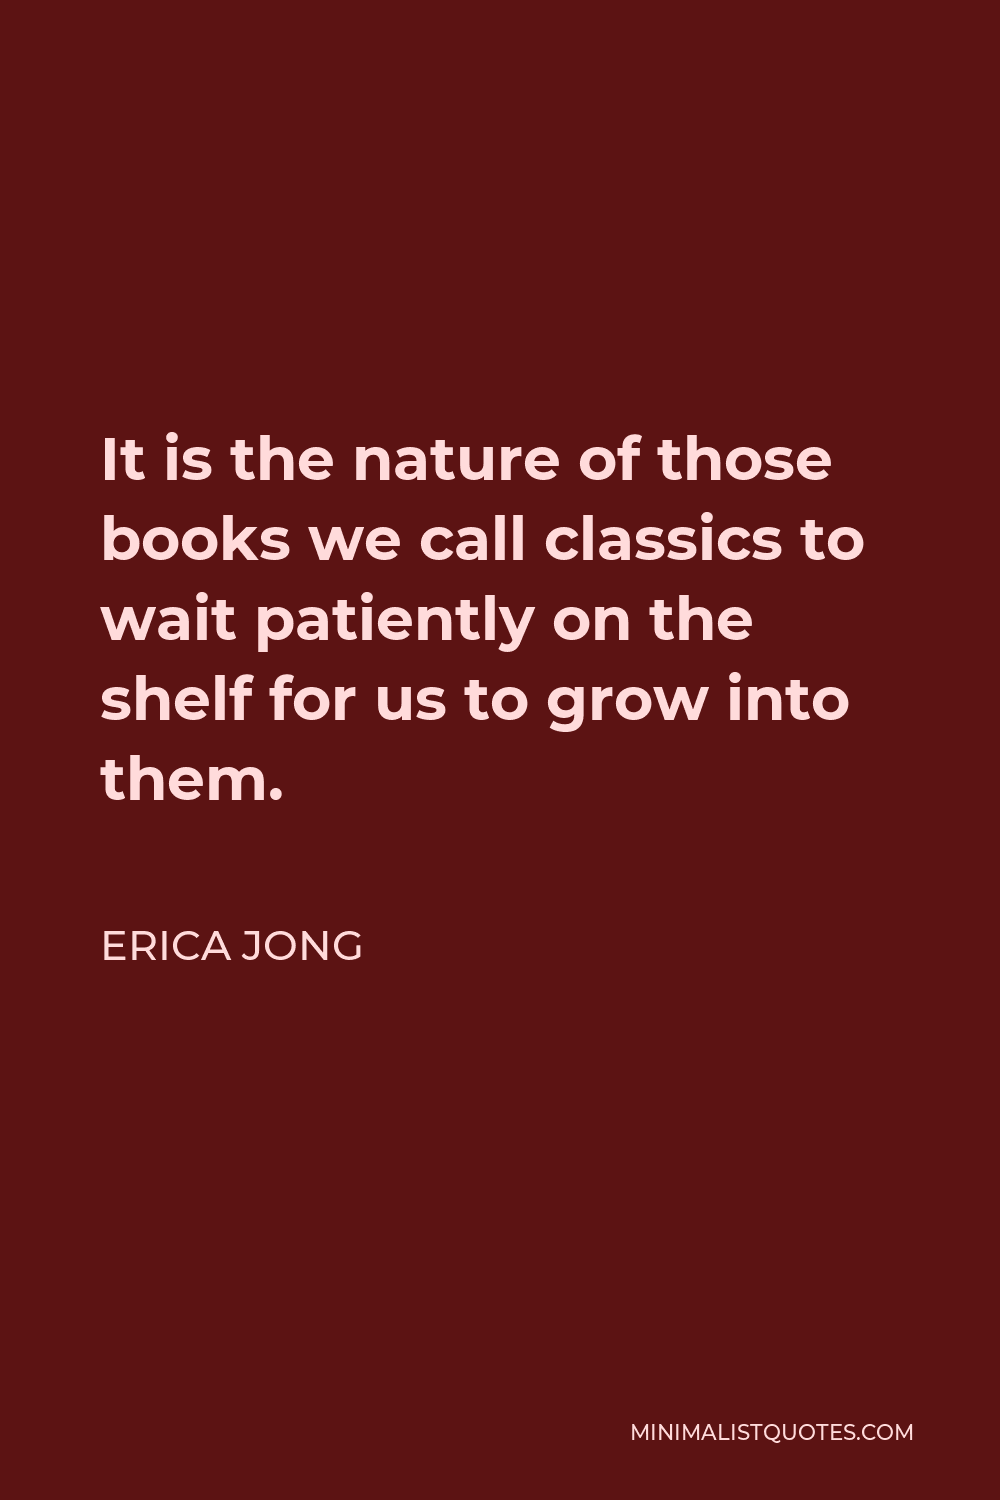 Erica Jong Quote - It is the nature of those books we call classics to wait patiently on the shelf for us to grow into them.